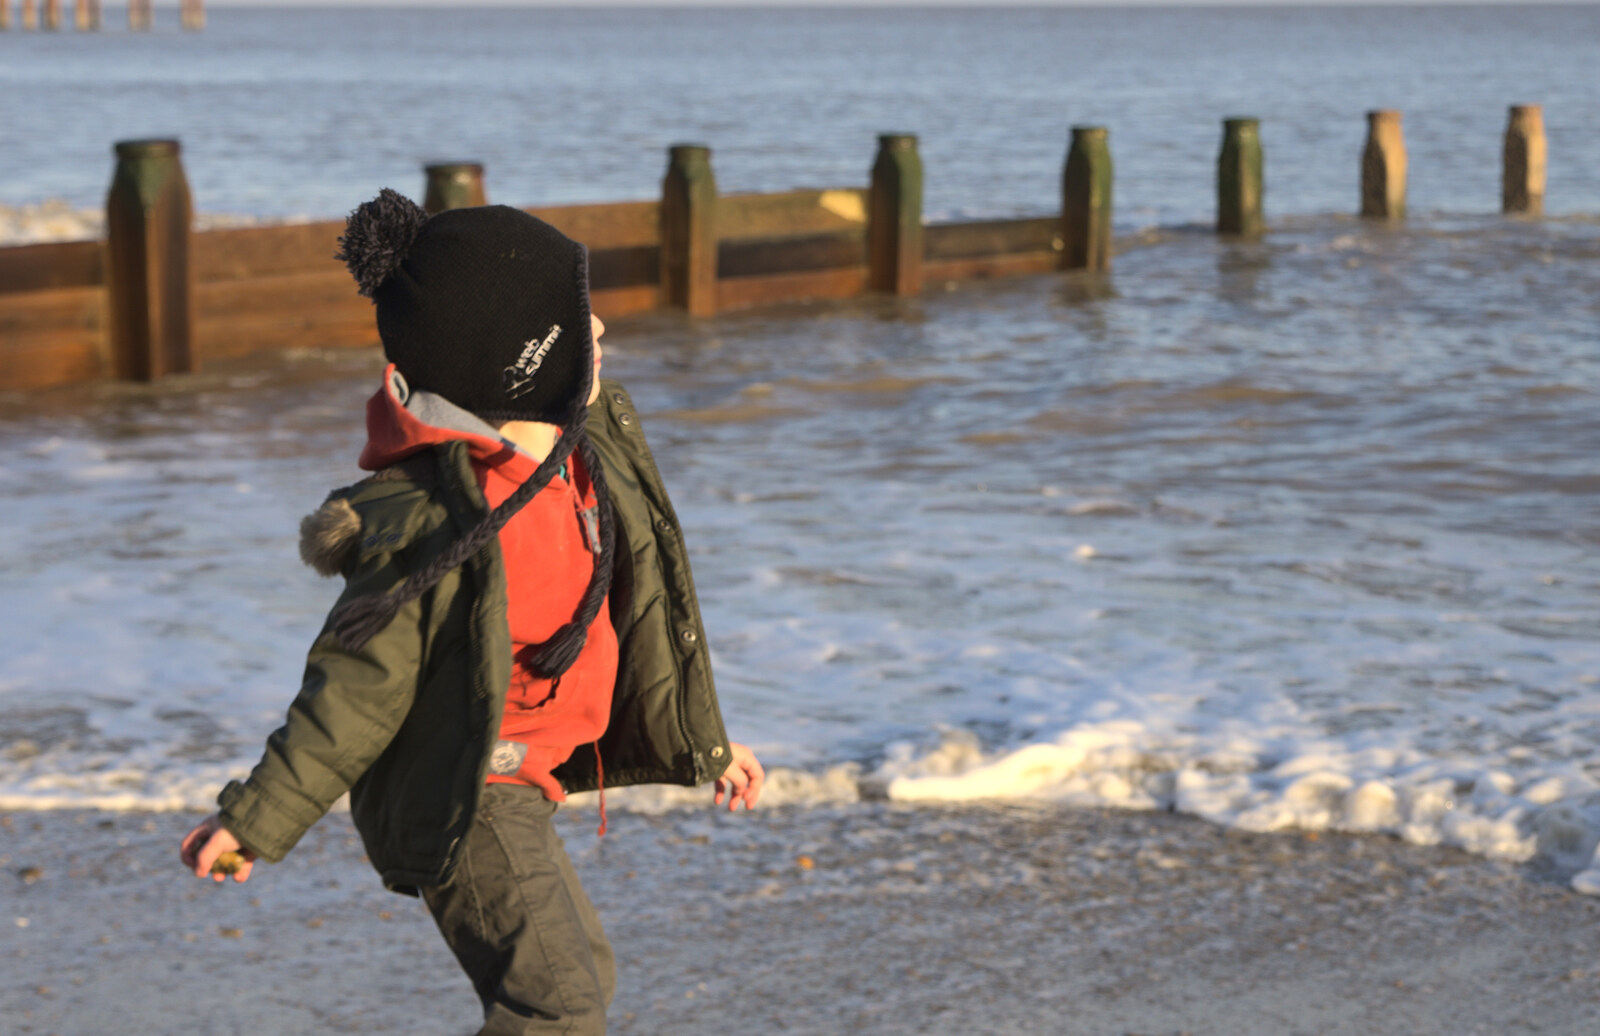 Fred hurls stones into the sea from Sunset on the Beach, Southwold, Suffolk - 30th December 2014